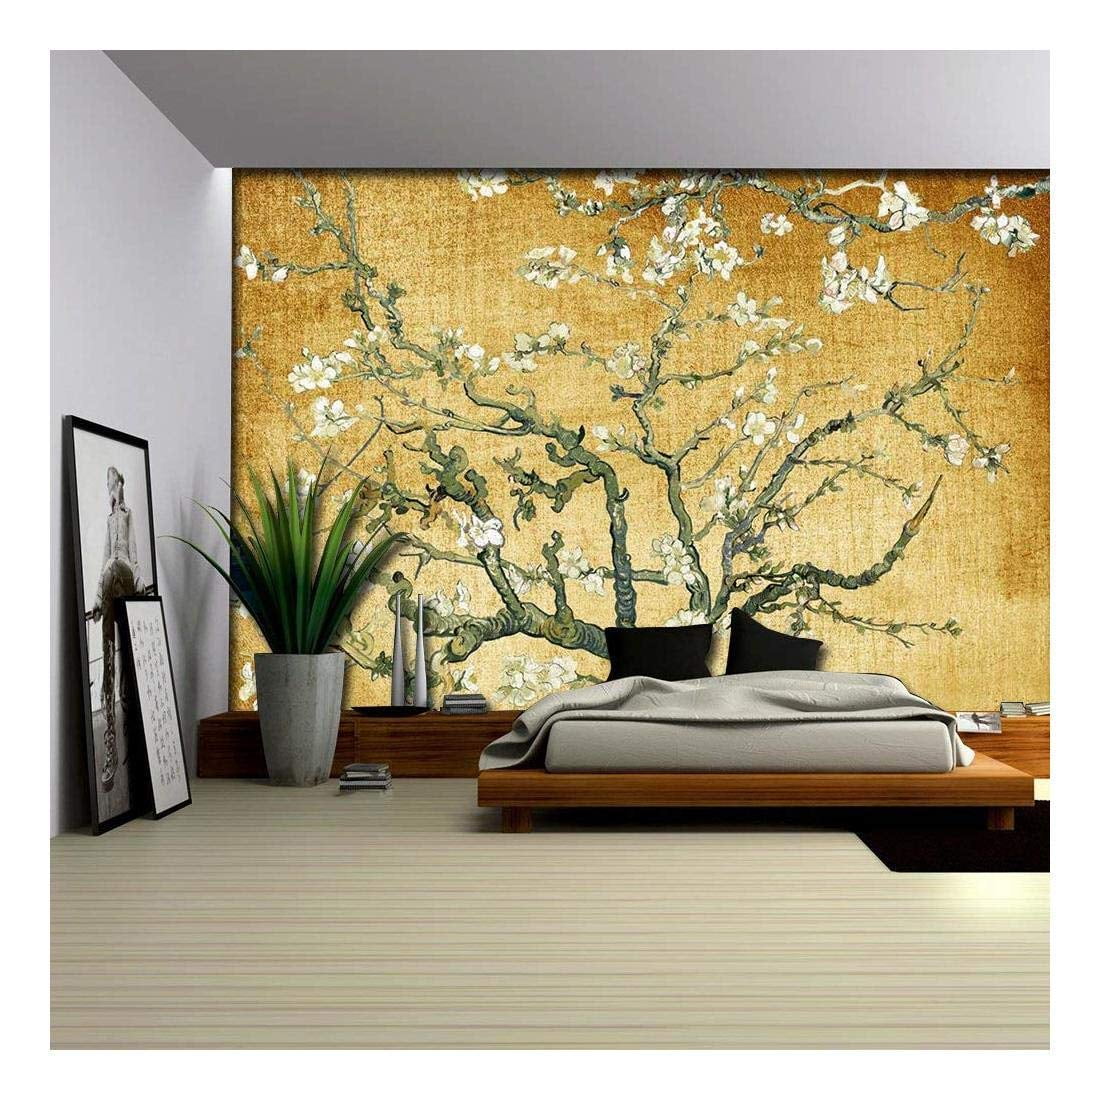 Wall26 Yellow Textured Almond Blossom by Vincent Van Gogh Peel & Stick  Wallpaper, 66x96 inches 